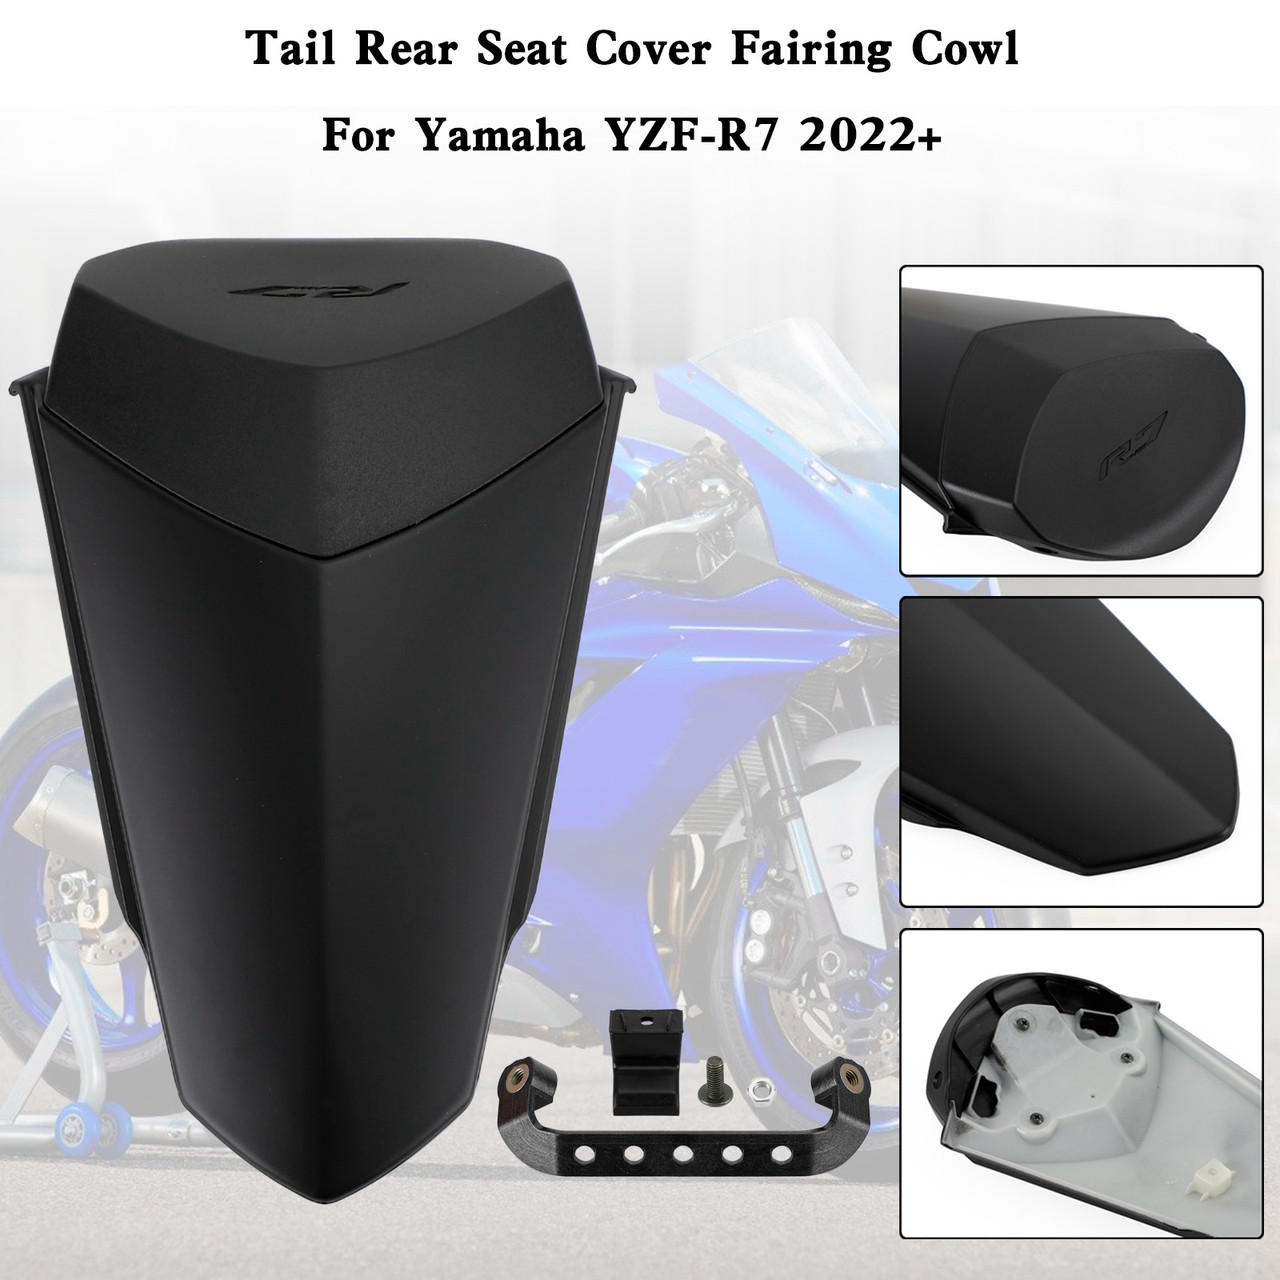 Tail Rear Seat Cover Fairing Cowl For YAMAHA YZF-R7 YZF R7 2022-2023 MBLK